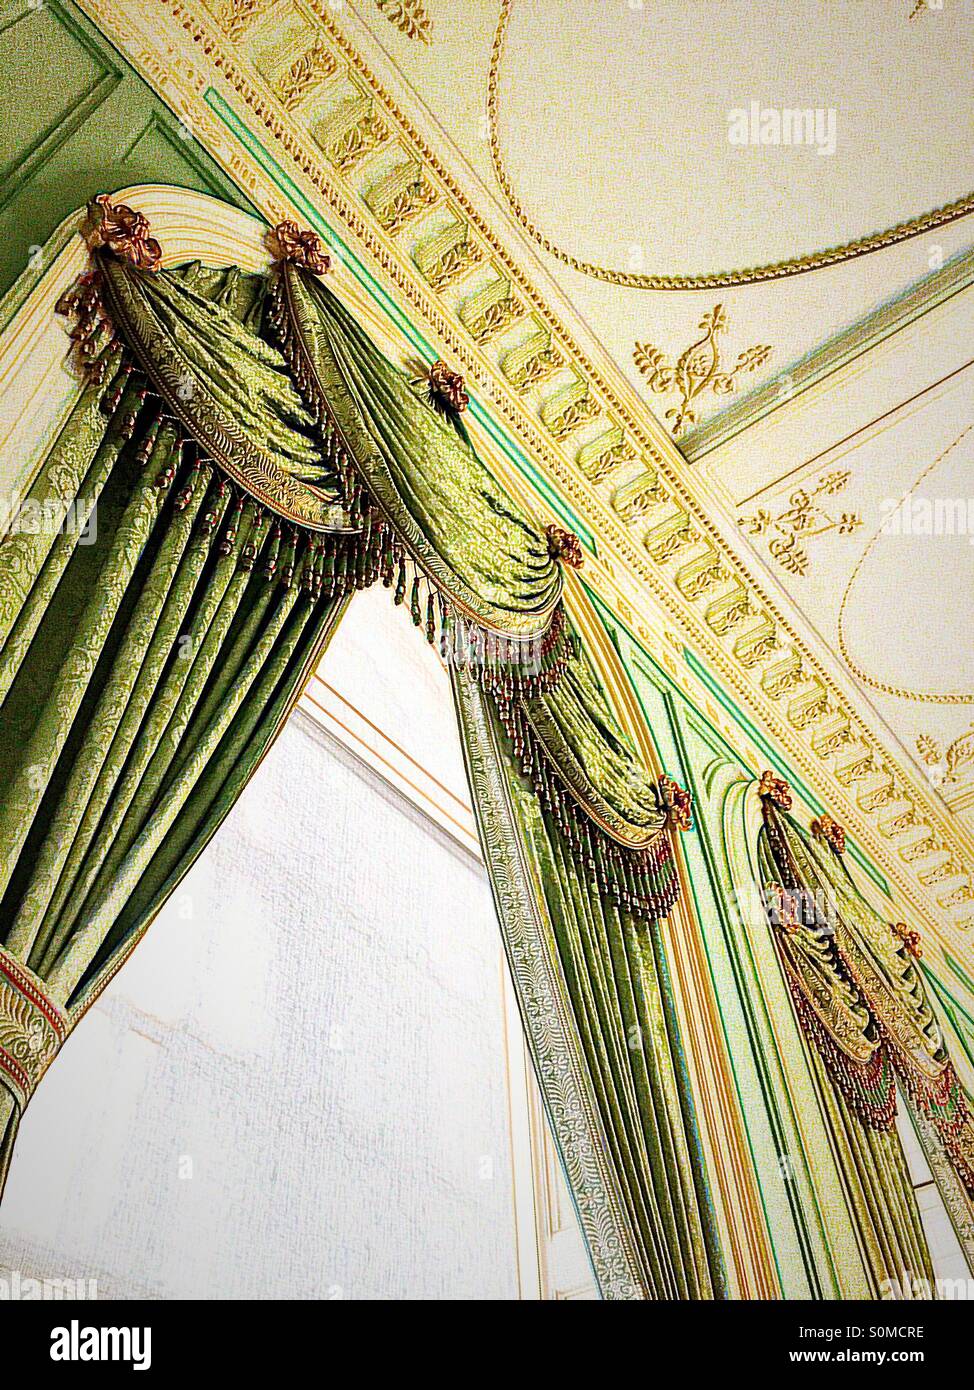 Ornamental vintage draperies hang in a majestic manner. Stock Photo